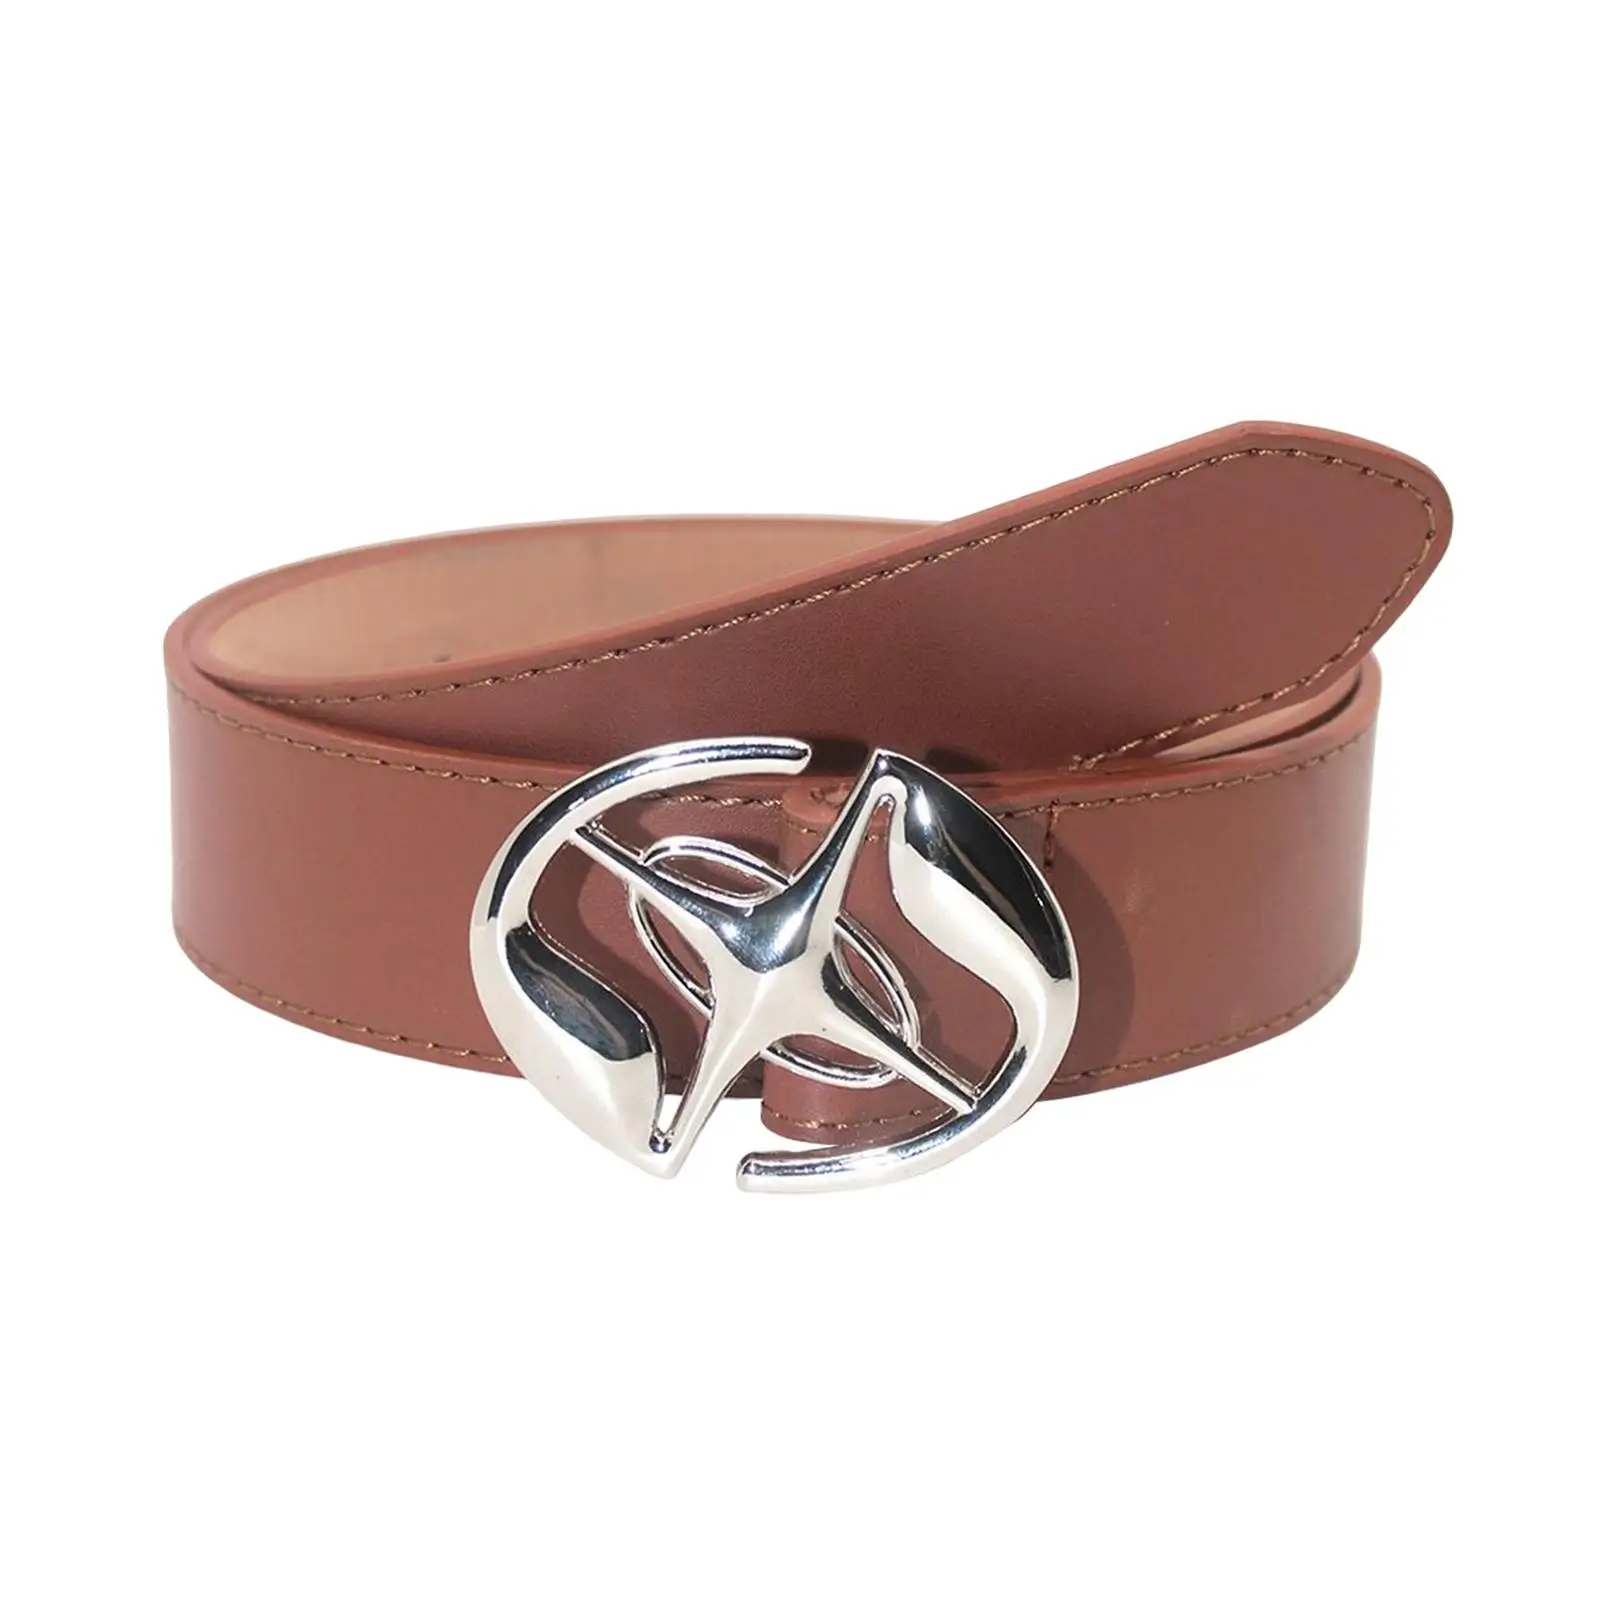 Women PU Leather Belt Fashion Versatile Adjustable Casual for Sweaters Jeans